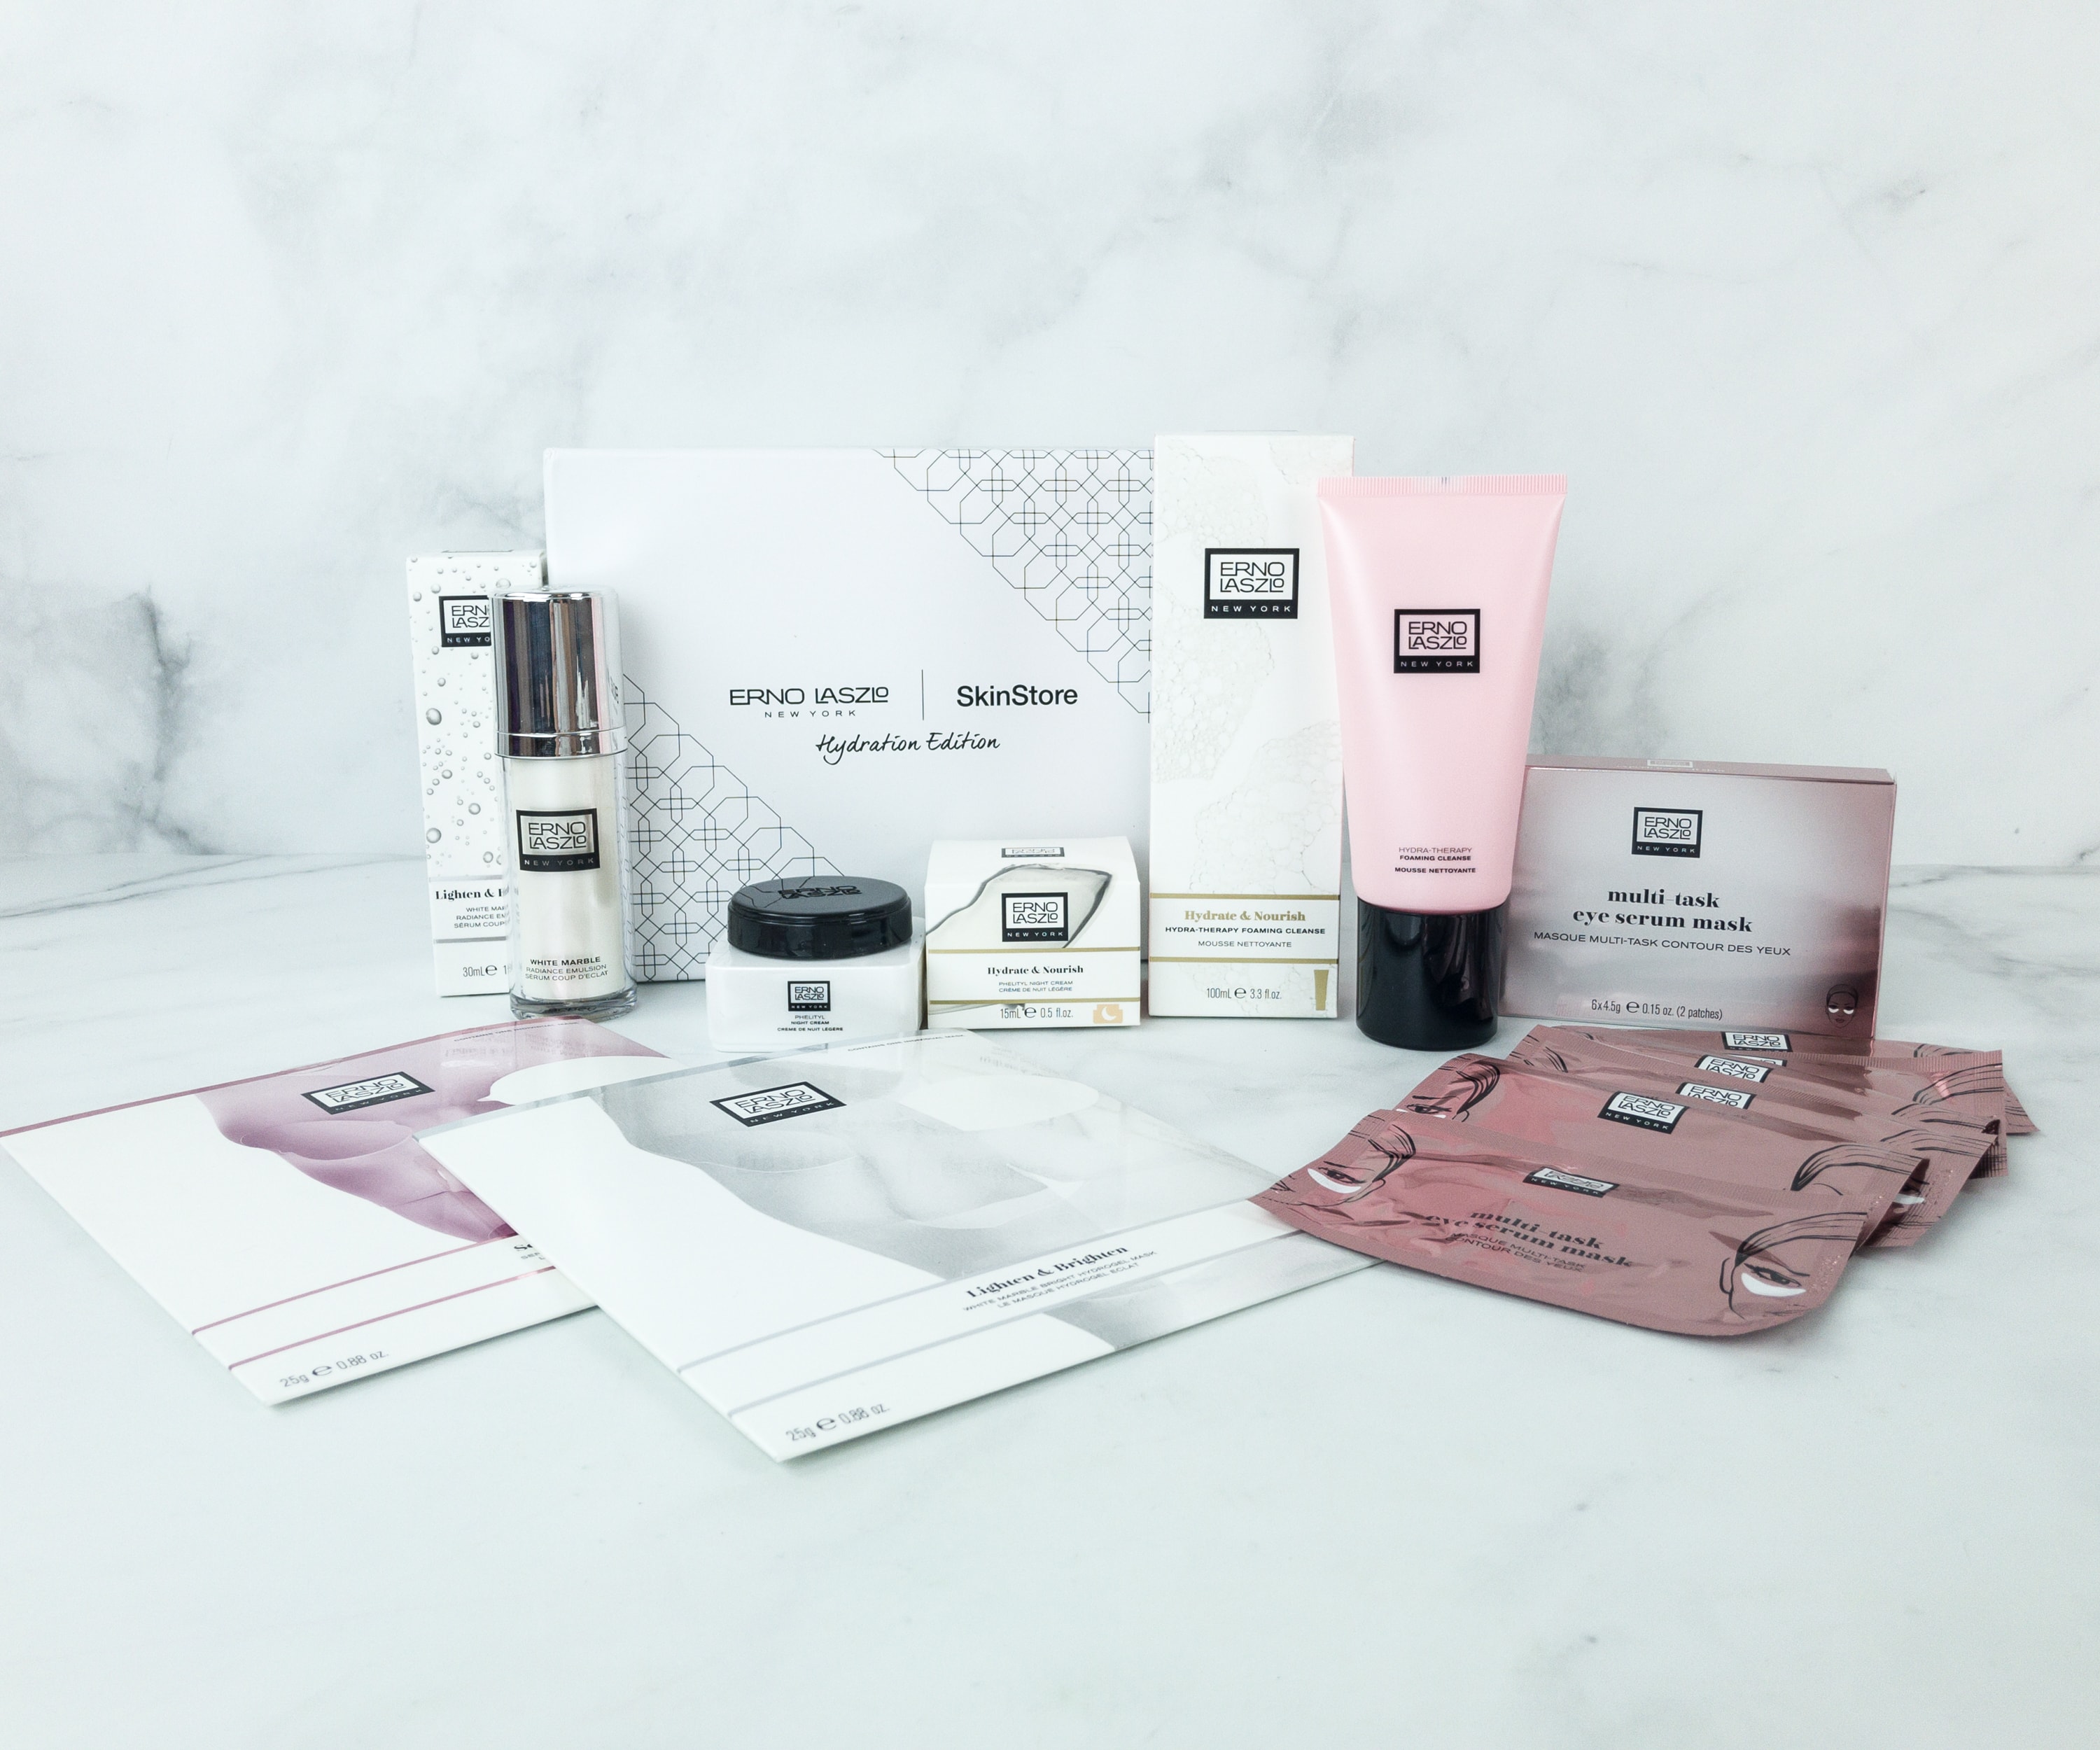 SkinStore x Laszlo Limited Edition Beauty Box + $10 Off Coupon! - Hello Subscription